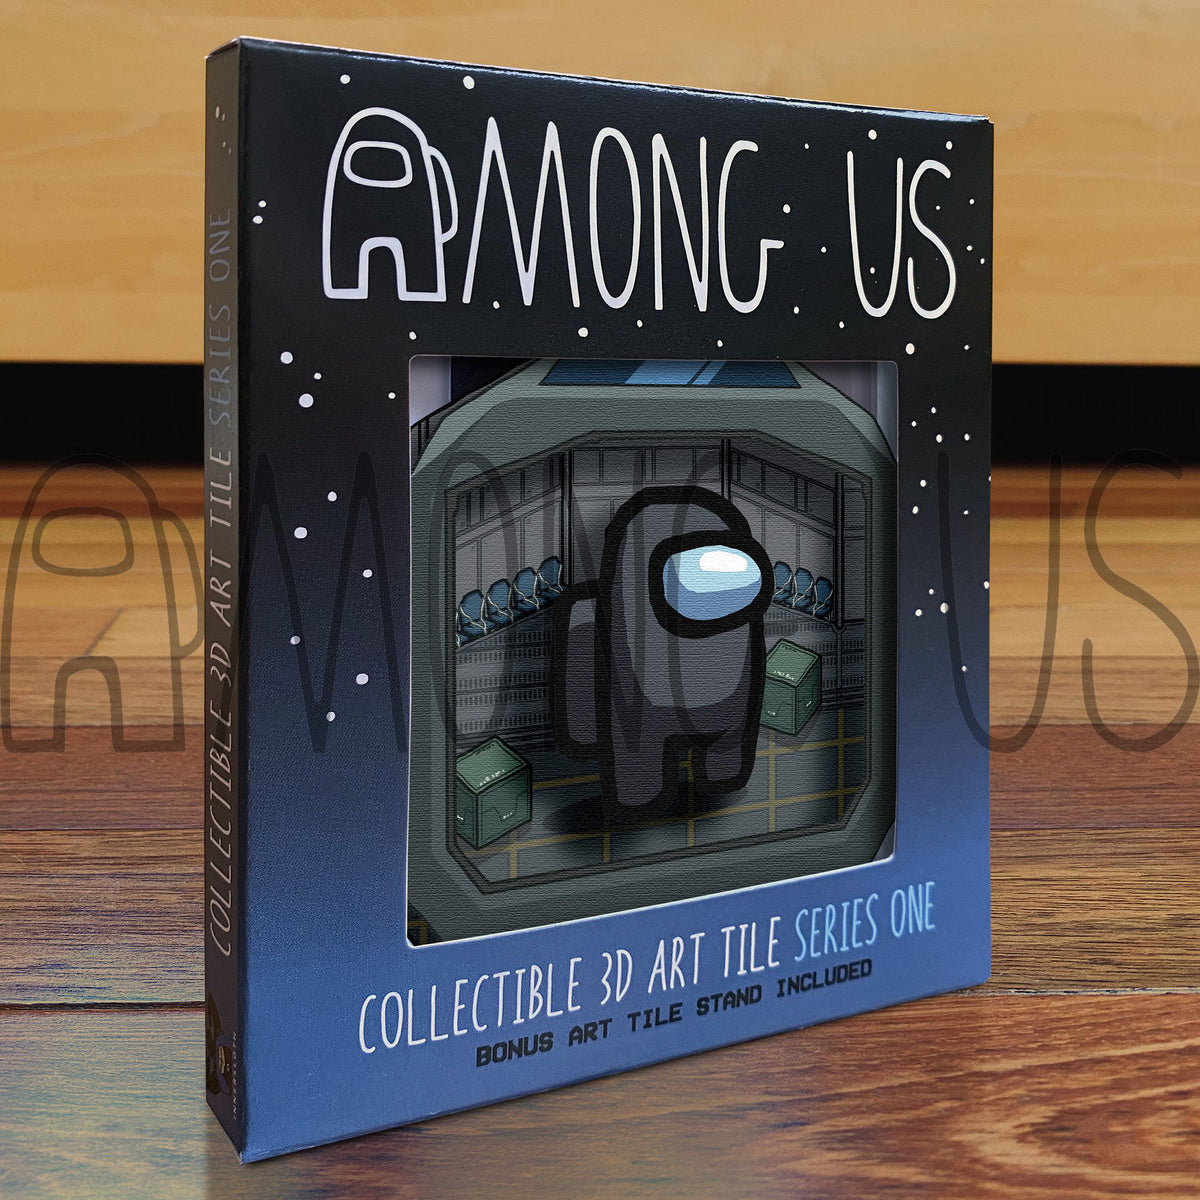 A photograph of the boxed Among Us: Crewmate Art Tiles by Artovision 3D. The art tile shows through the box window and shows a standing black crewmate and art tile stand.